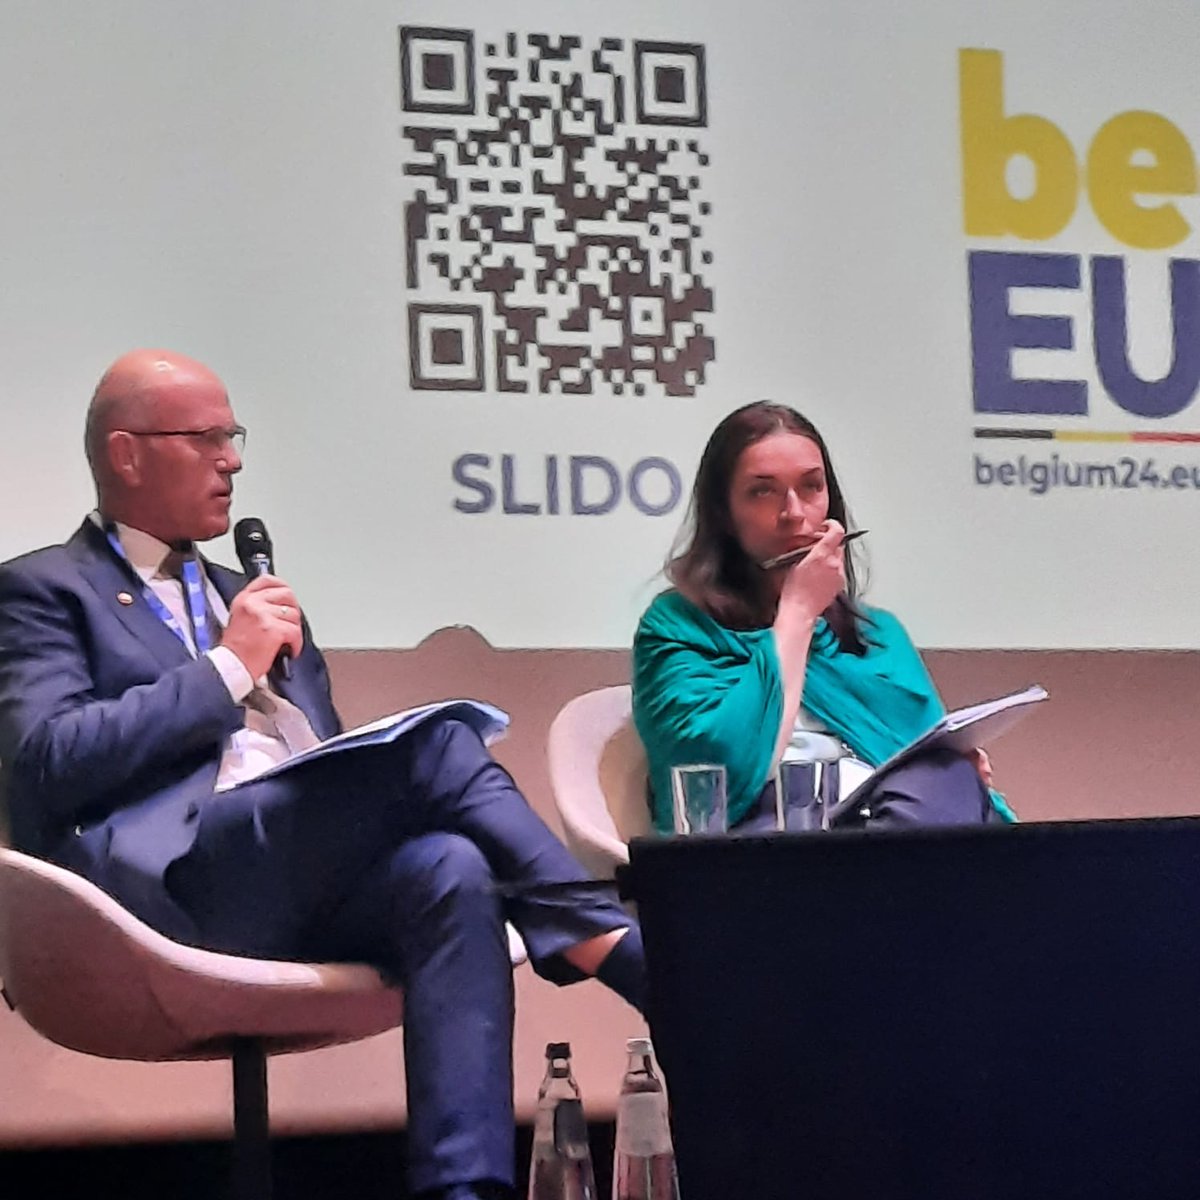 🗣️ 'We have to identify patient groups with unmet needs and prioritise them in how we organise and finance our healthcare systems' 📸 Our Vice President Dr Ole Johan Bakke addressed #EU2024BE conference on health-related needs as drivers for healthcare policy and innovation